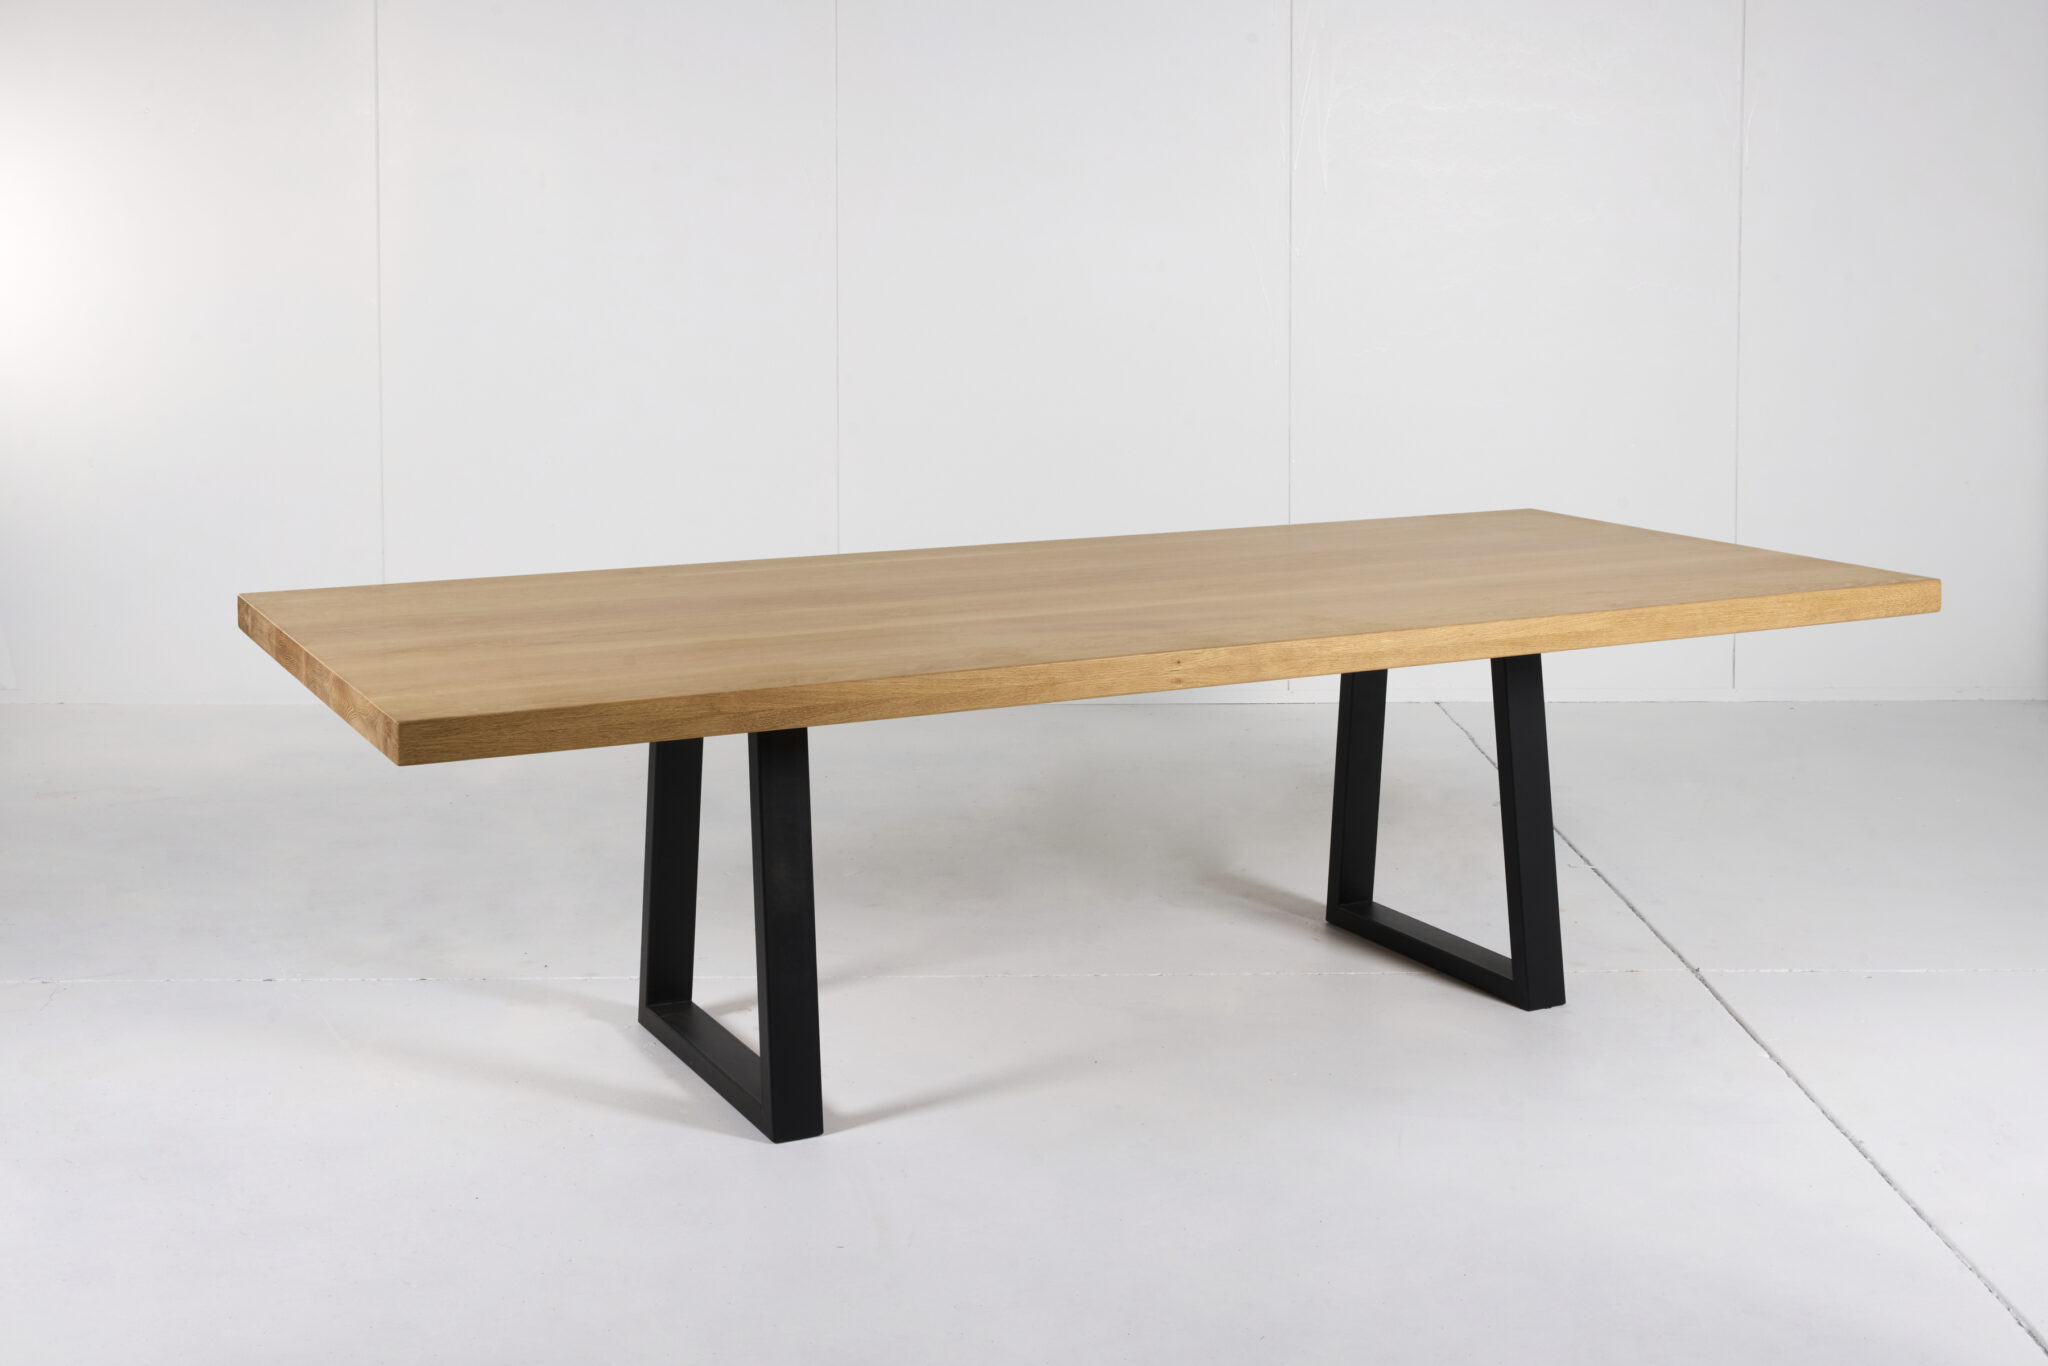 Image of Noosa Dining Table by Arranmore Furniture showcasing its sleek U or Klein Leg design in a modern dining setting